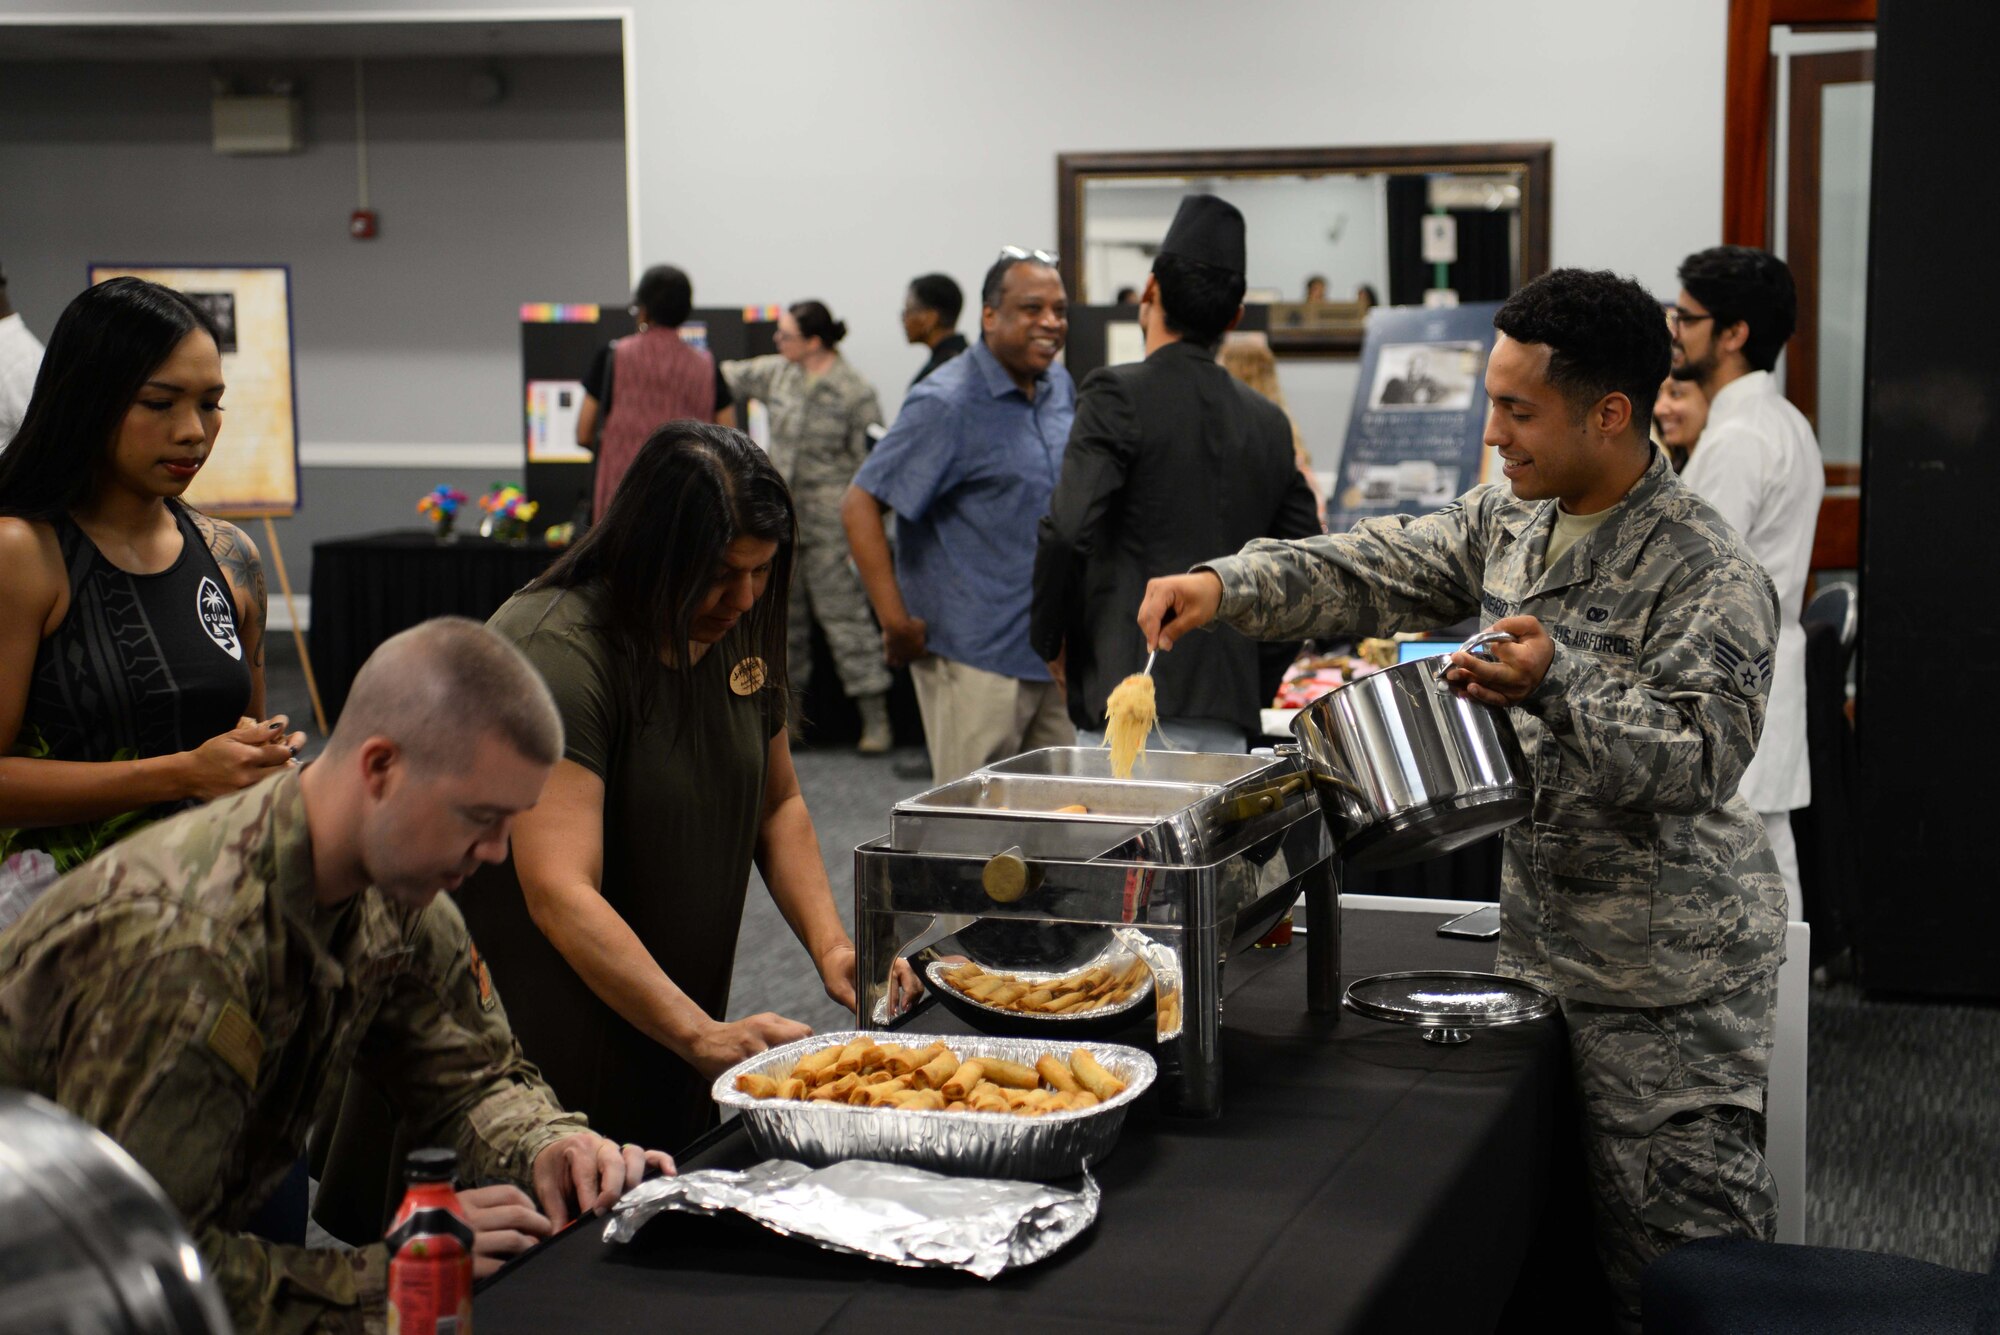 Booth attendants getting food and area ready before Diversity Day starts, June 7, 2019, on Columbus Air Force Base, Miss. Diversity Day featured different cultures and gave participants the chance to educate others on the history of their backgrounds. (U.S. Air Force photo by Airman 1st Class Jake Jacobsen)